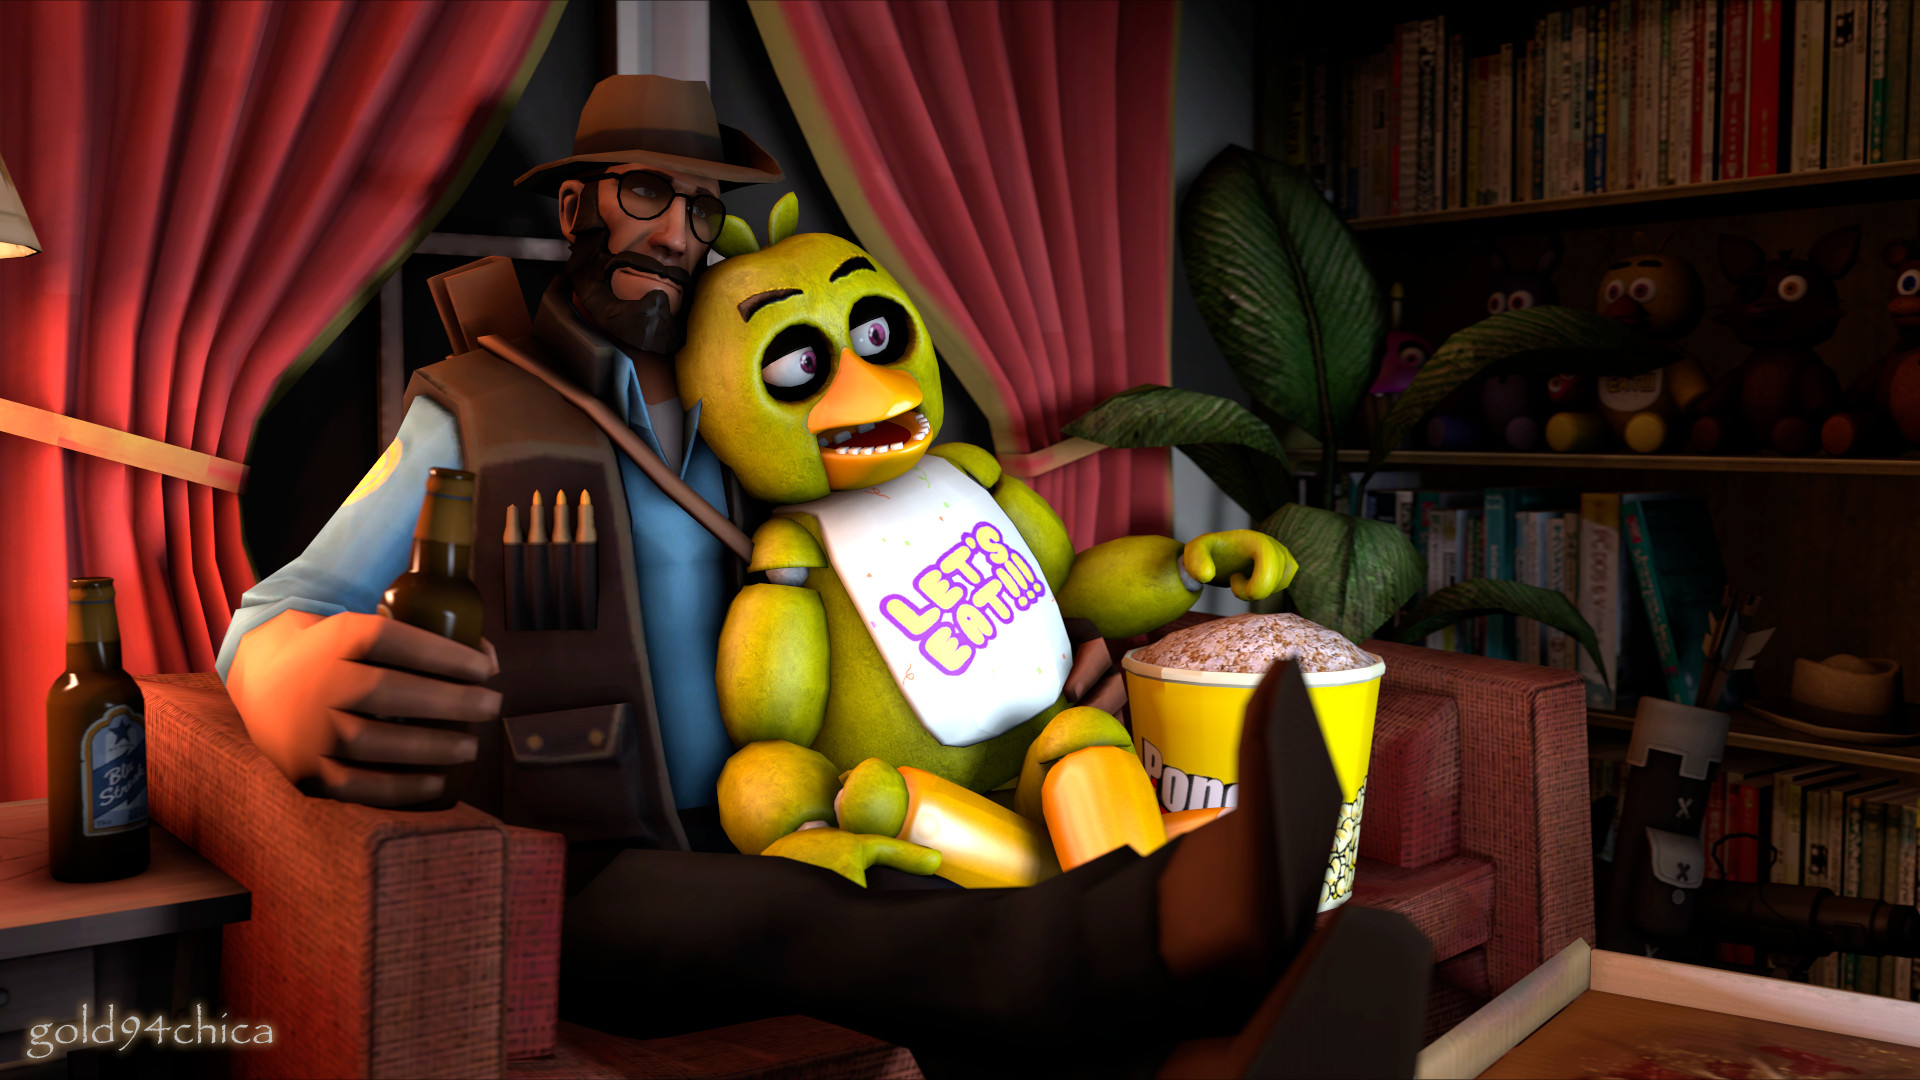 1920x1080 ... Movie Night with my Mate (SFM Wallpaper) by gold94chica